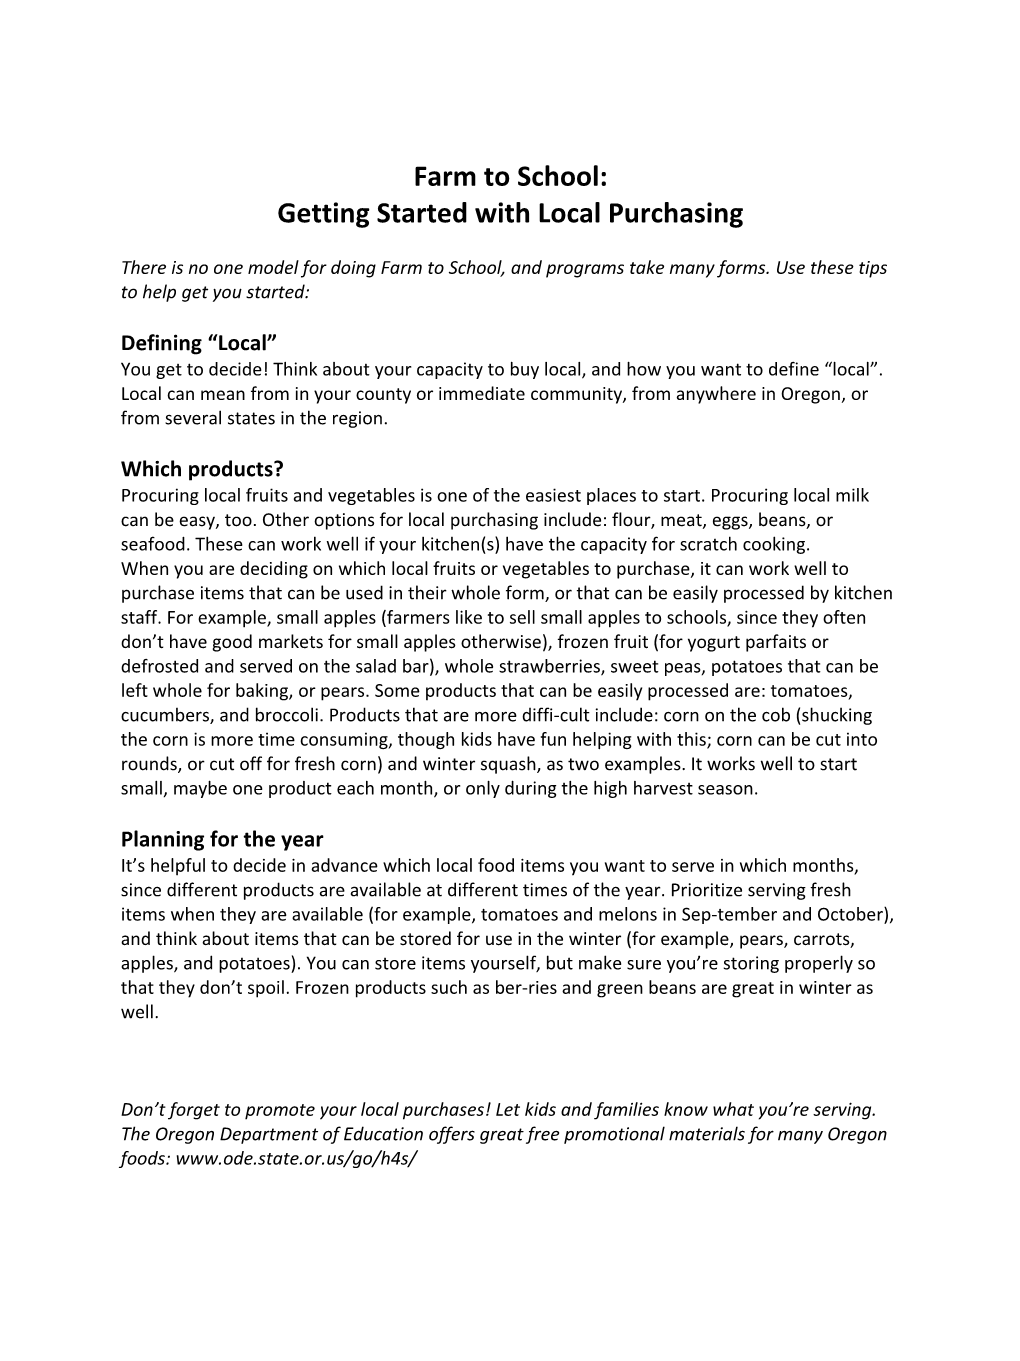 Getting Started with Local Purchasing